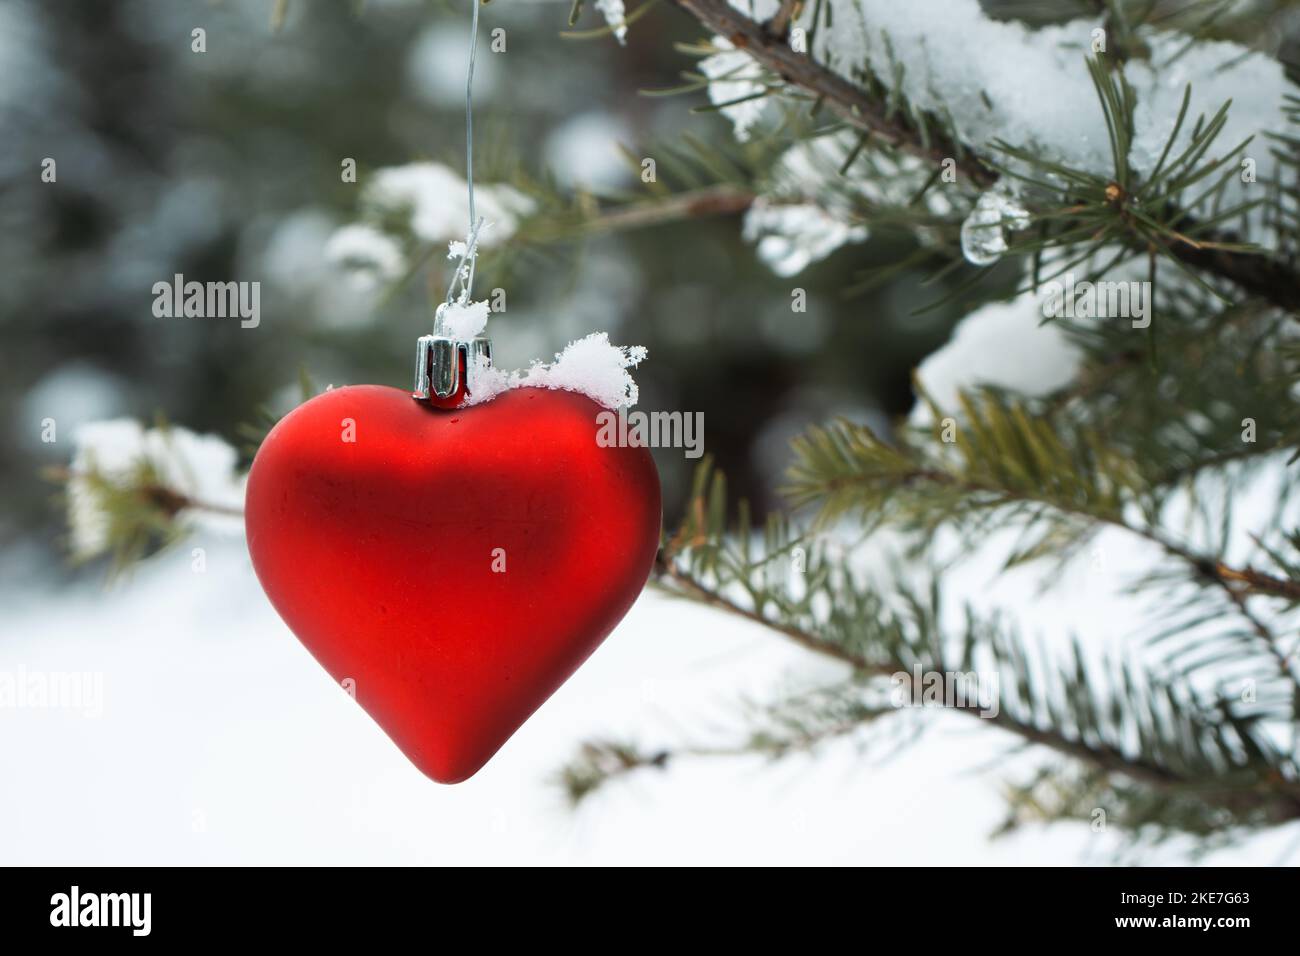 A red heart shaped ornament hangs on a snow covered tree branch Stock Photo